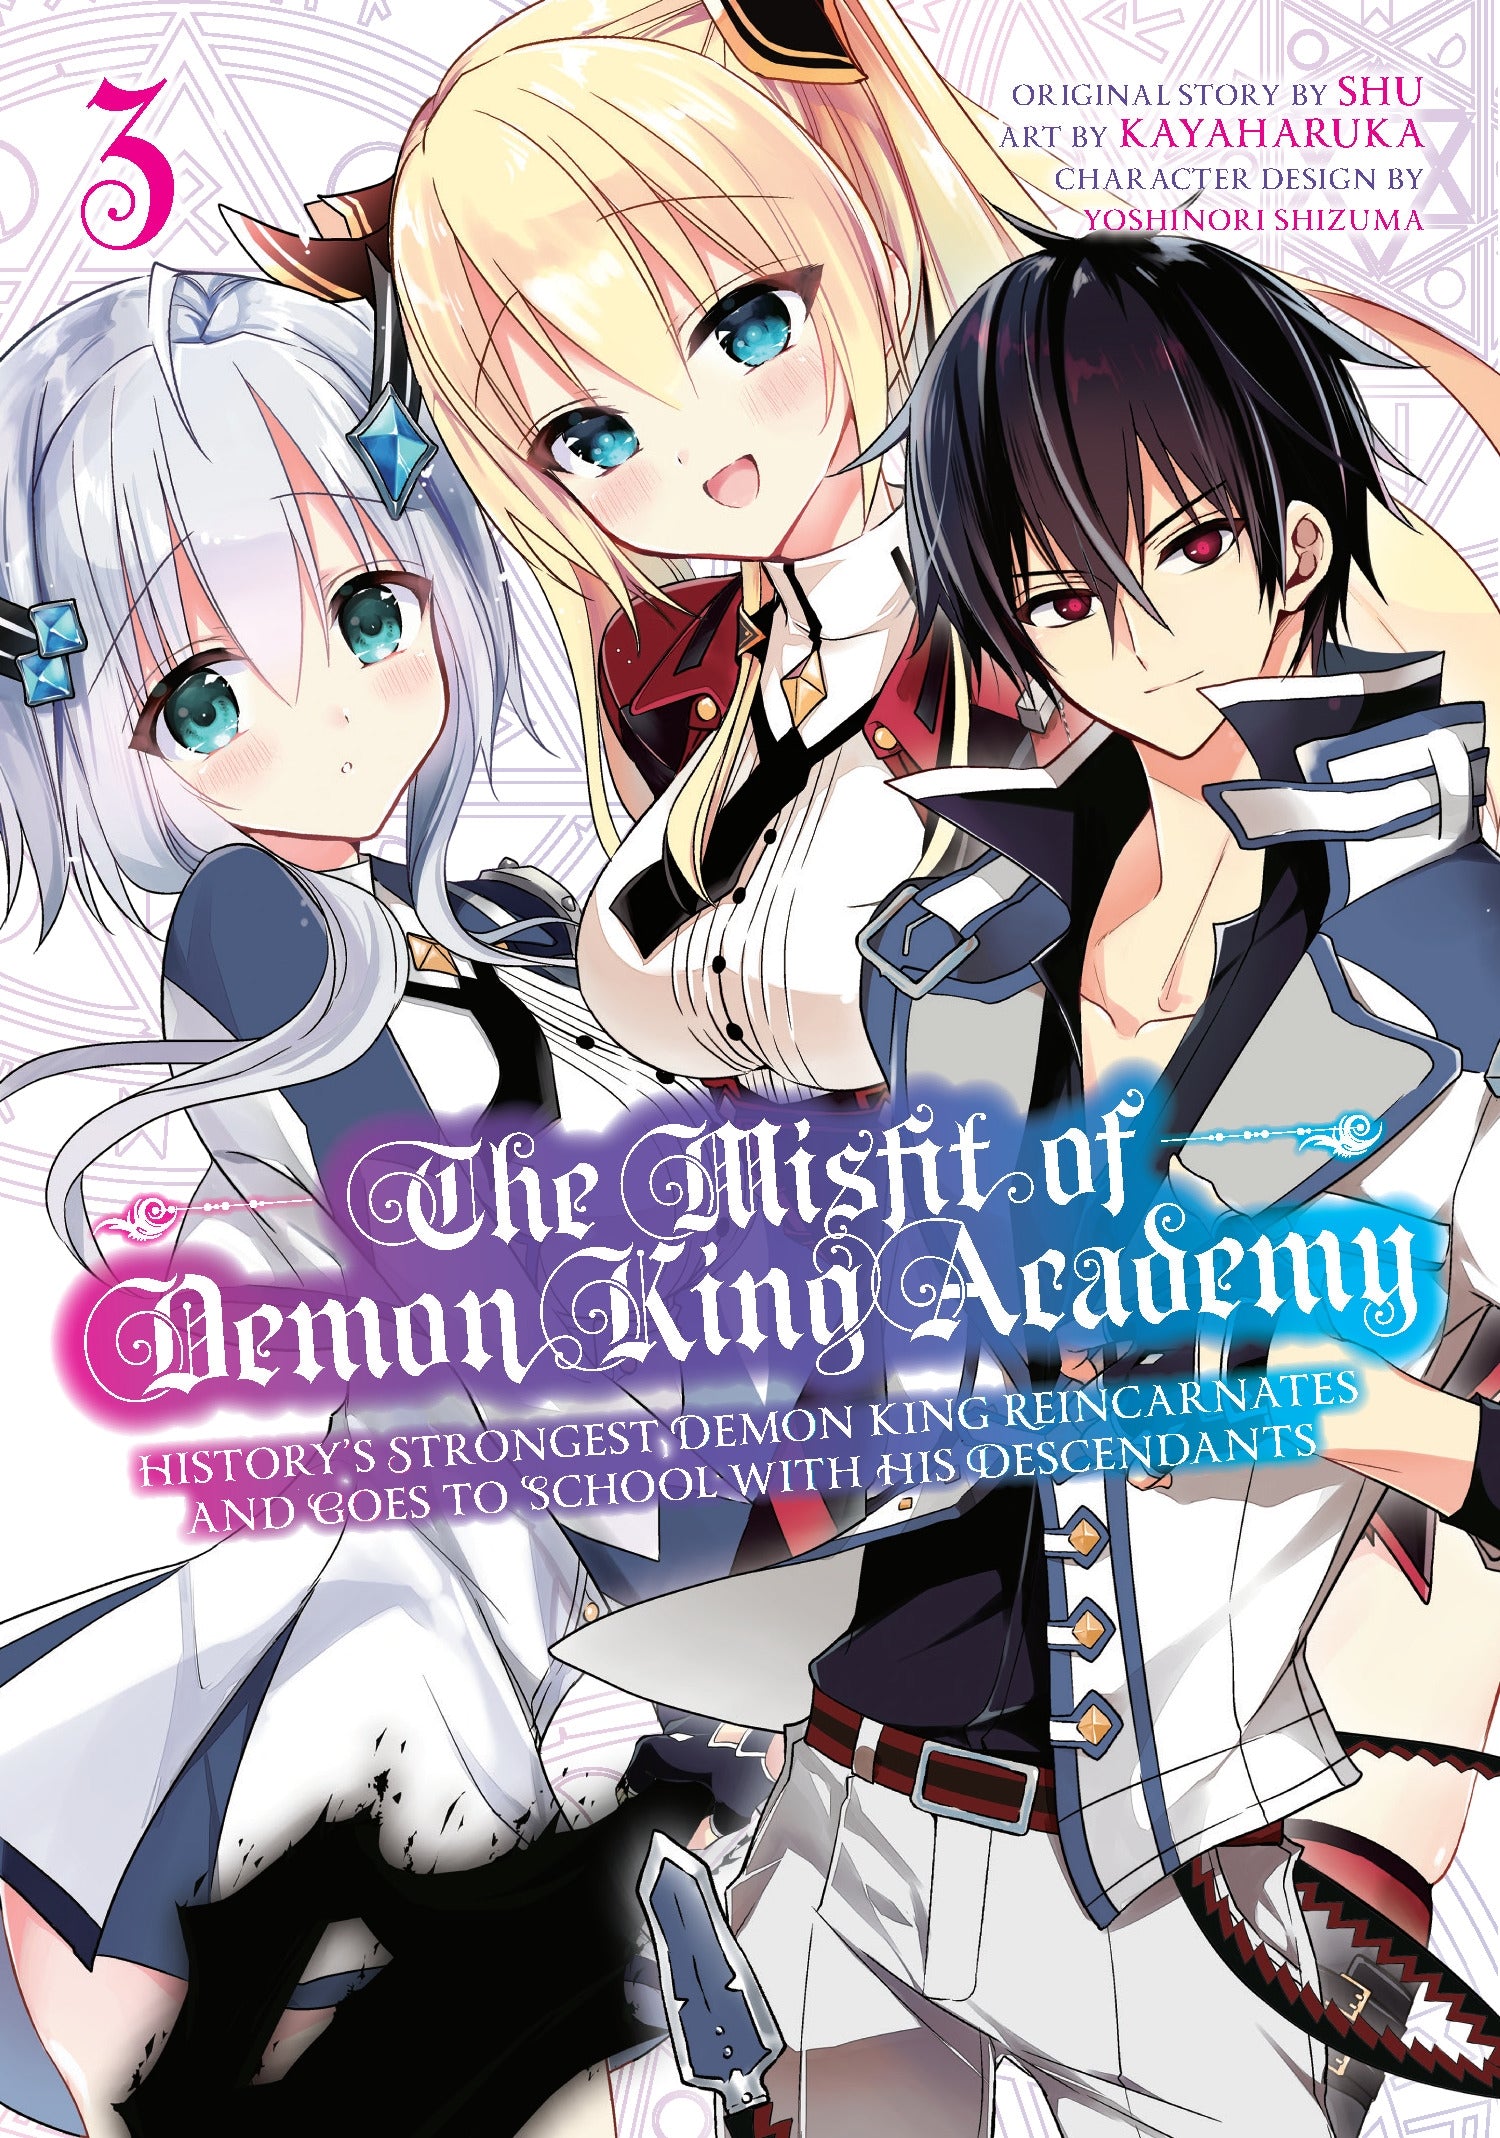 The Misfit of Demon King Academy 3 : History's Strongest Demon King Reincarnates and Goes to School with His Descendants - Manga Warehouse